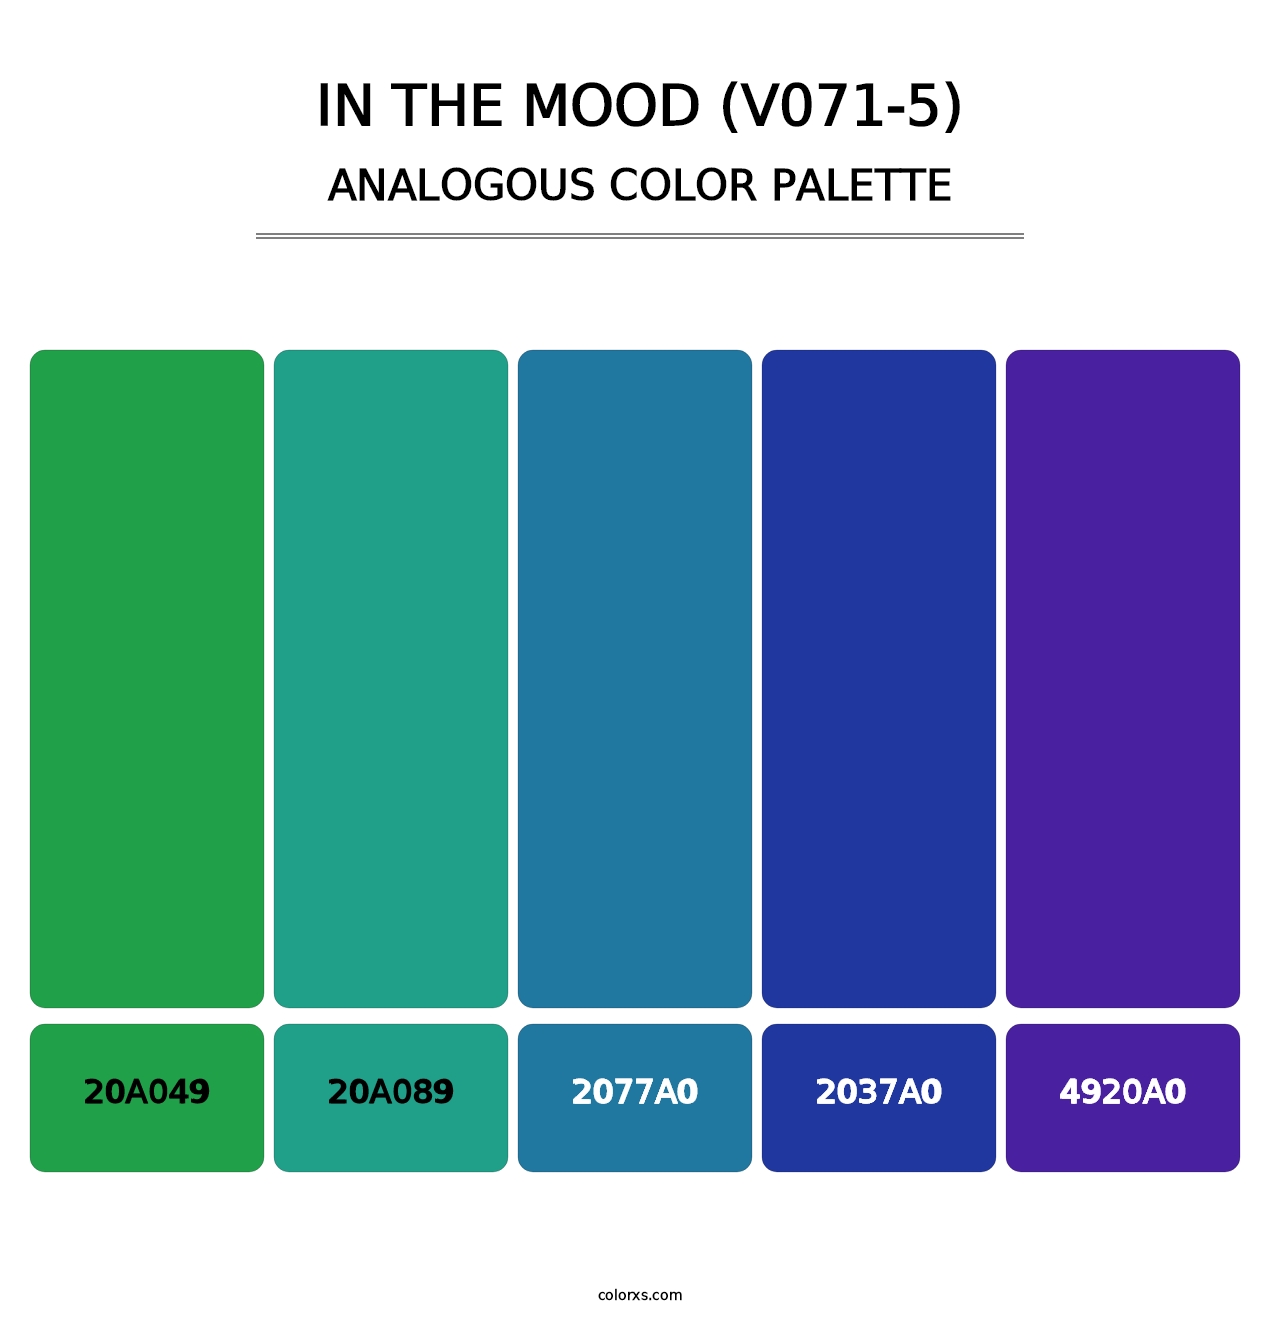 In the Mood (V071-5) - Analogous Color Palette